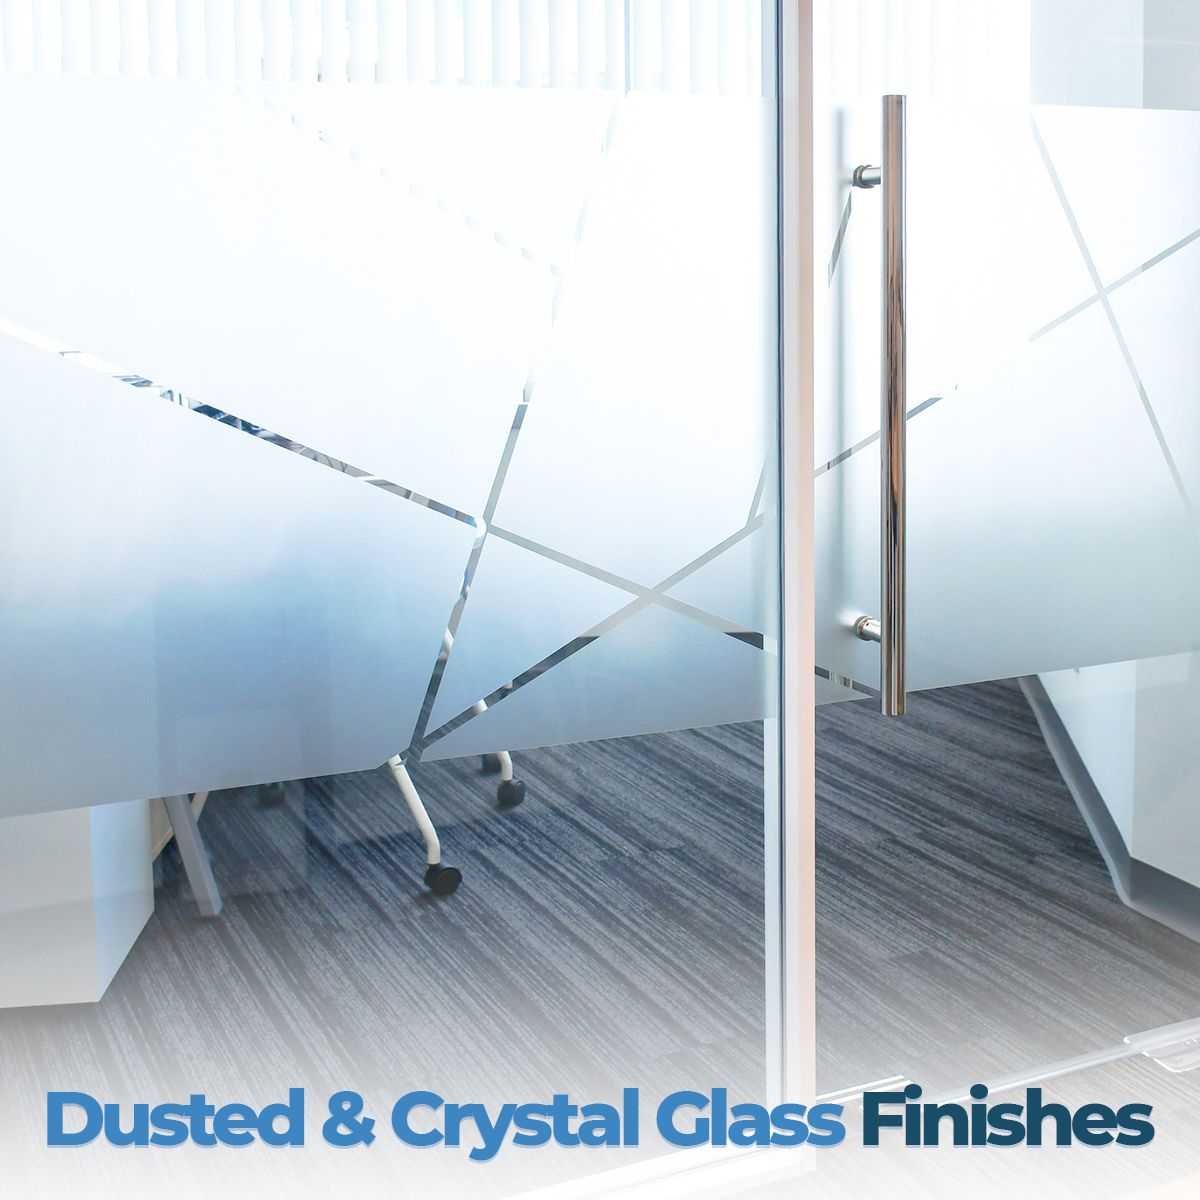 Dusted & Crystal Glass Finishes